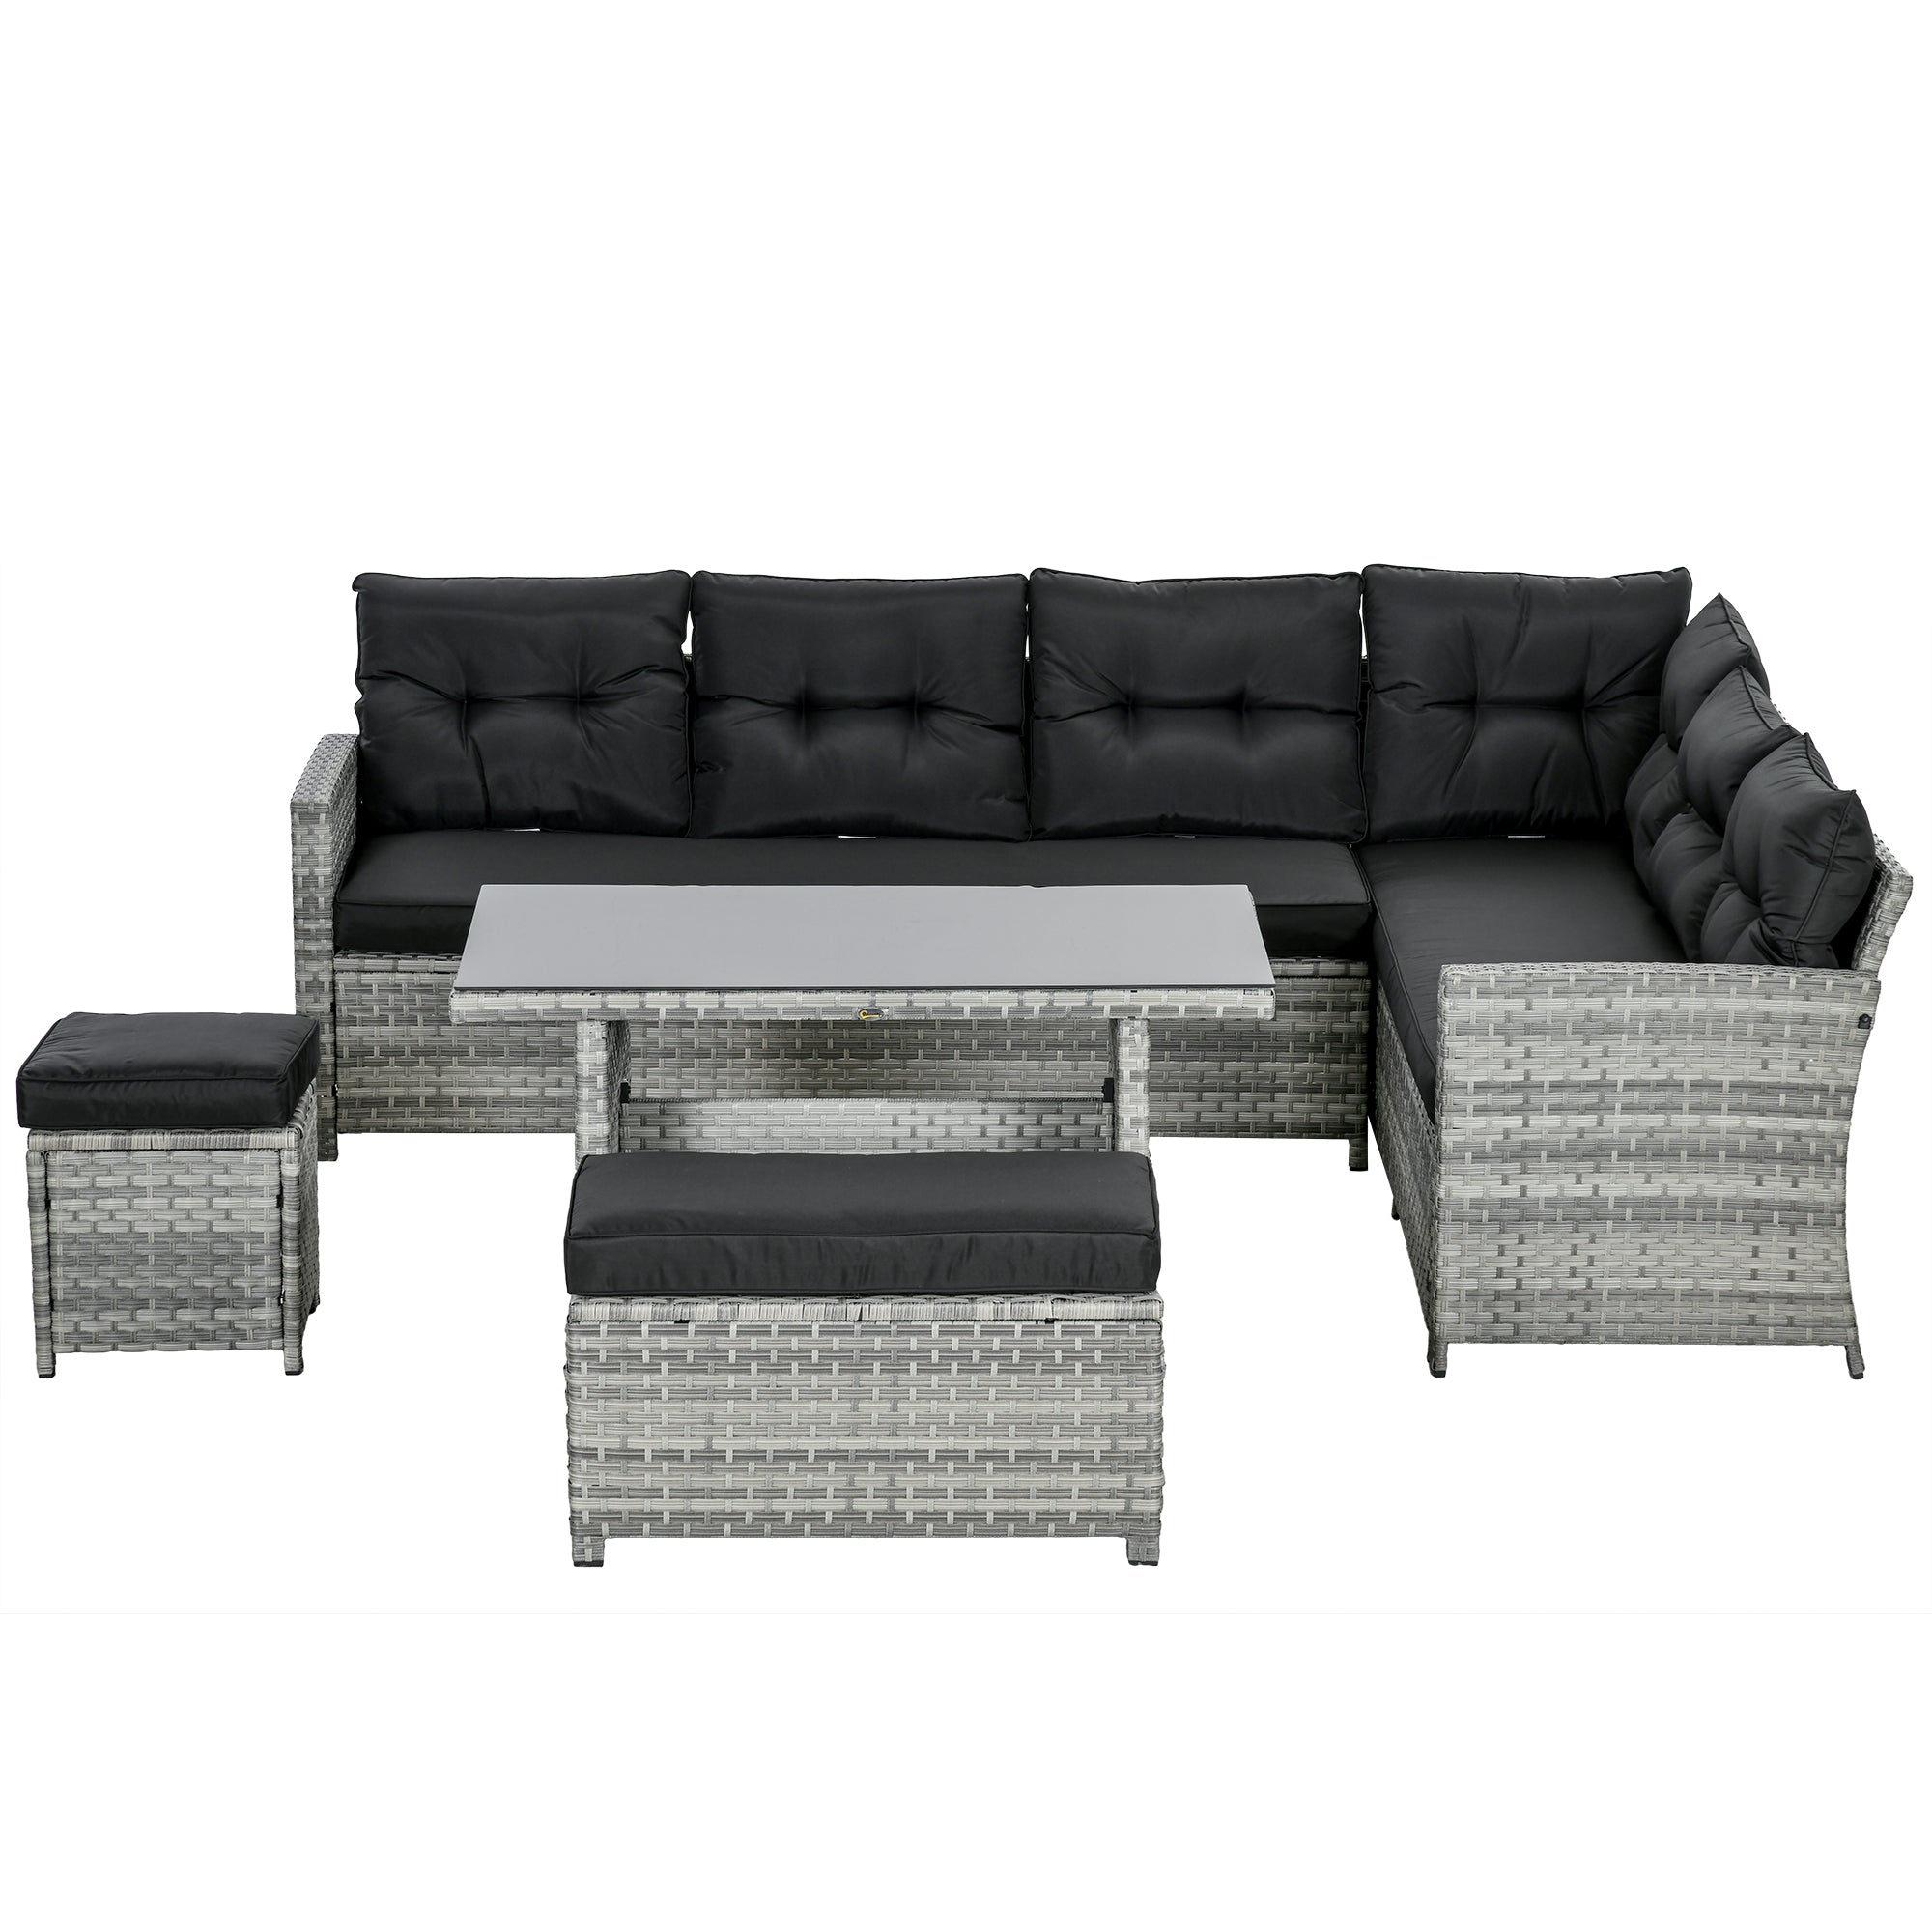 5-Piece Rattan Patio Furniture Set with Corner Sofa, Footstools, Glass Coffee Table, Cushions, Mixed Grey-0